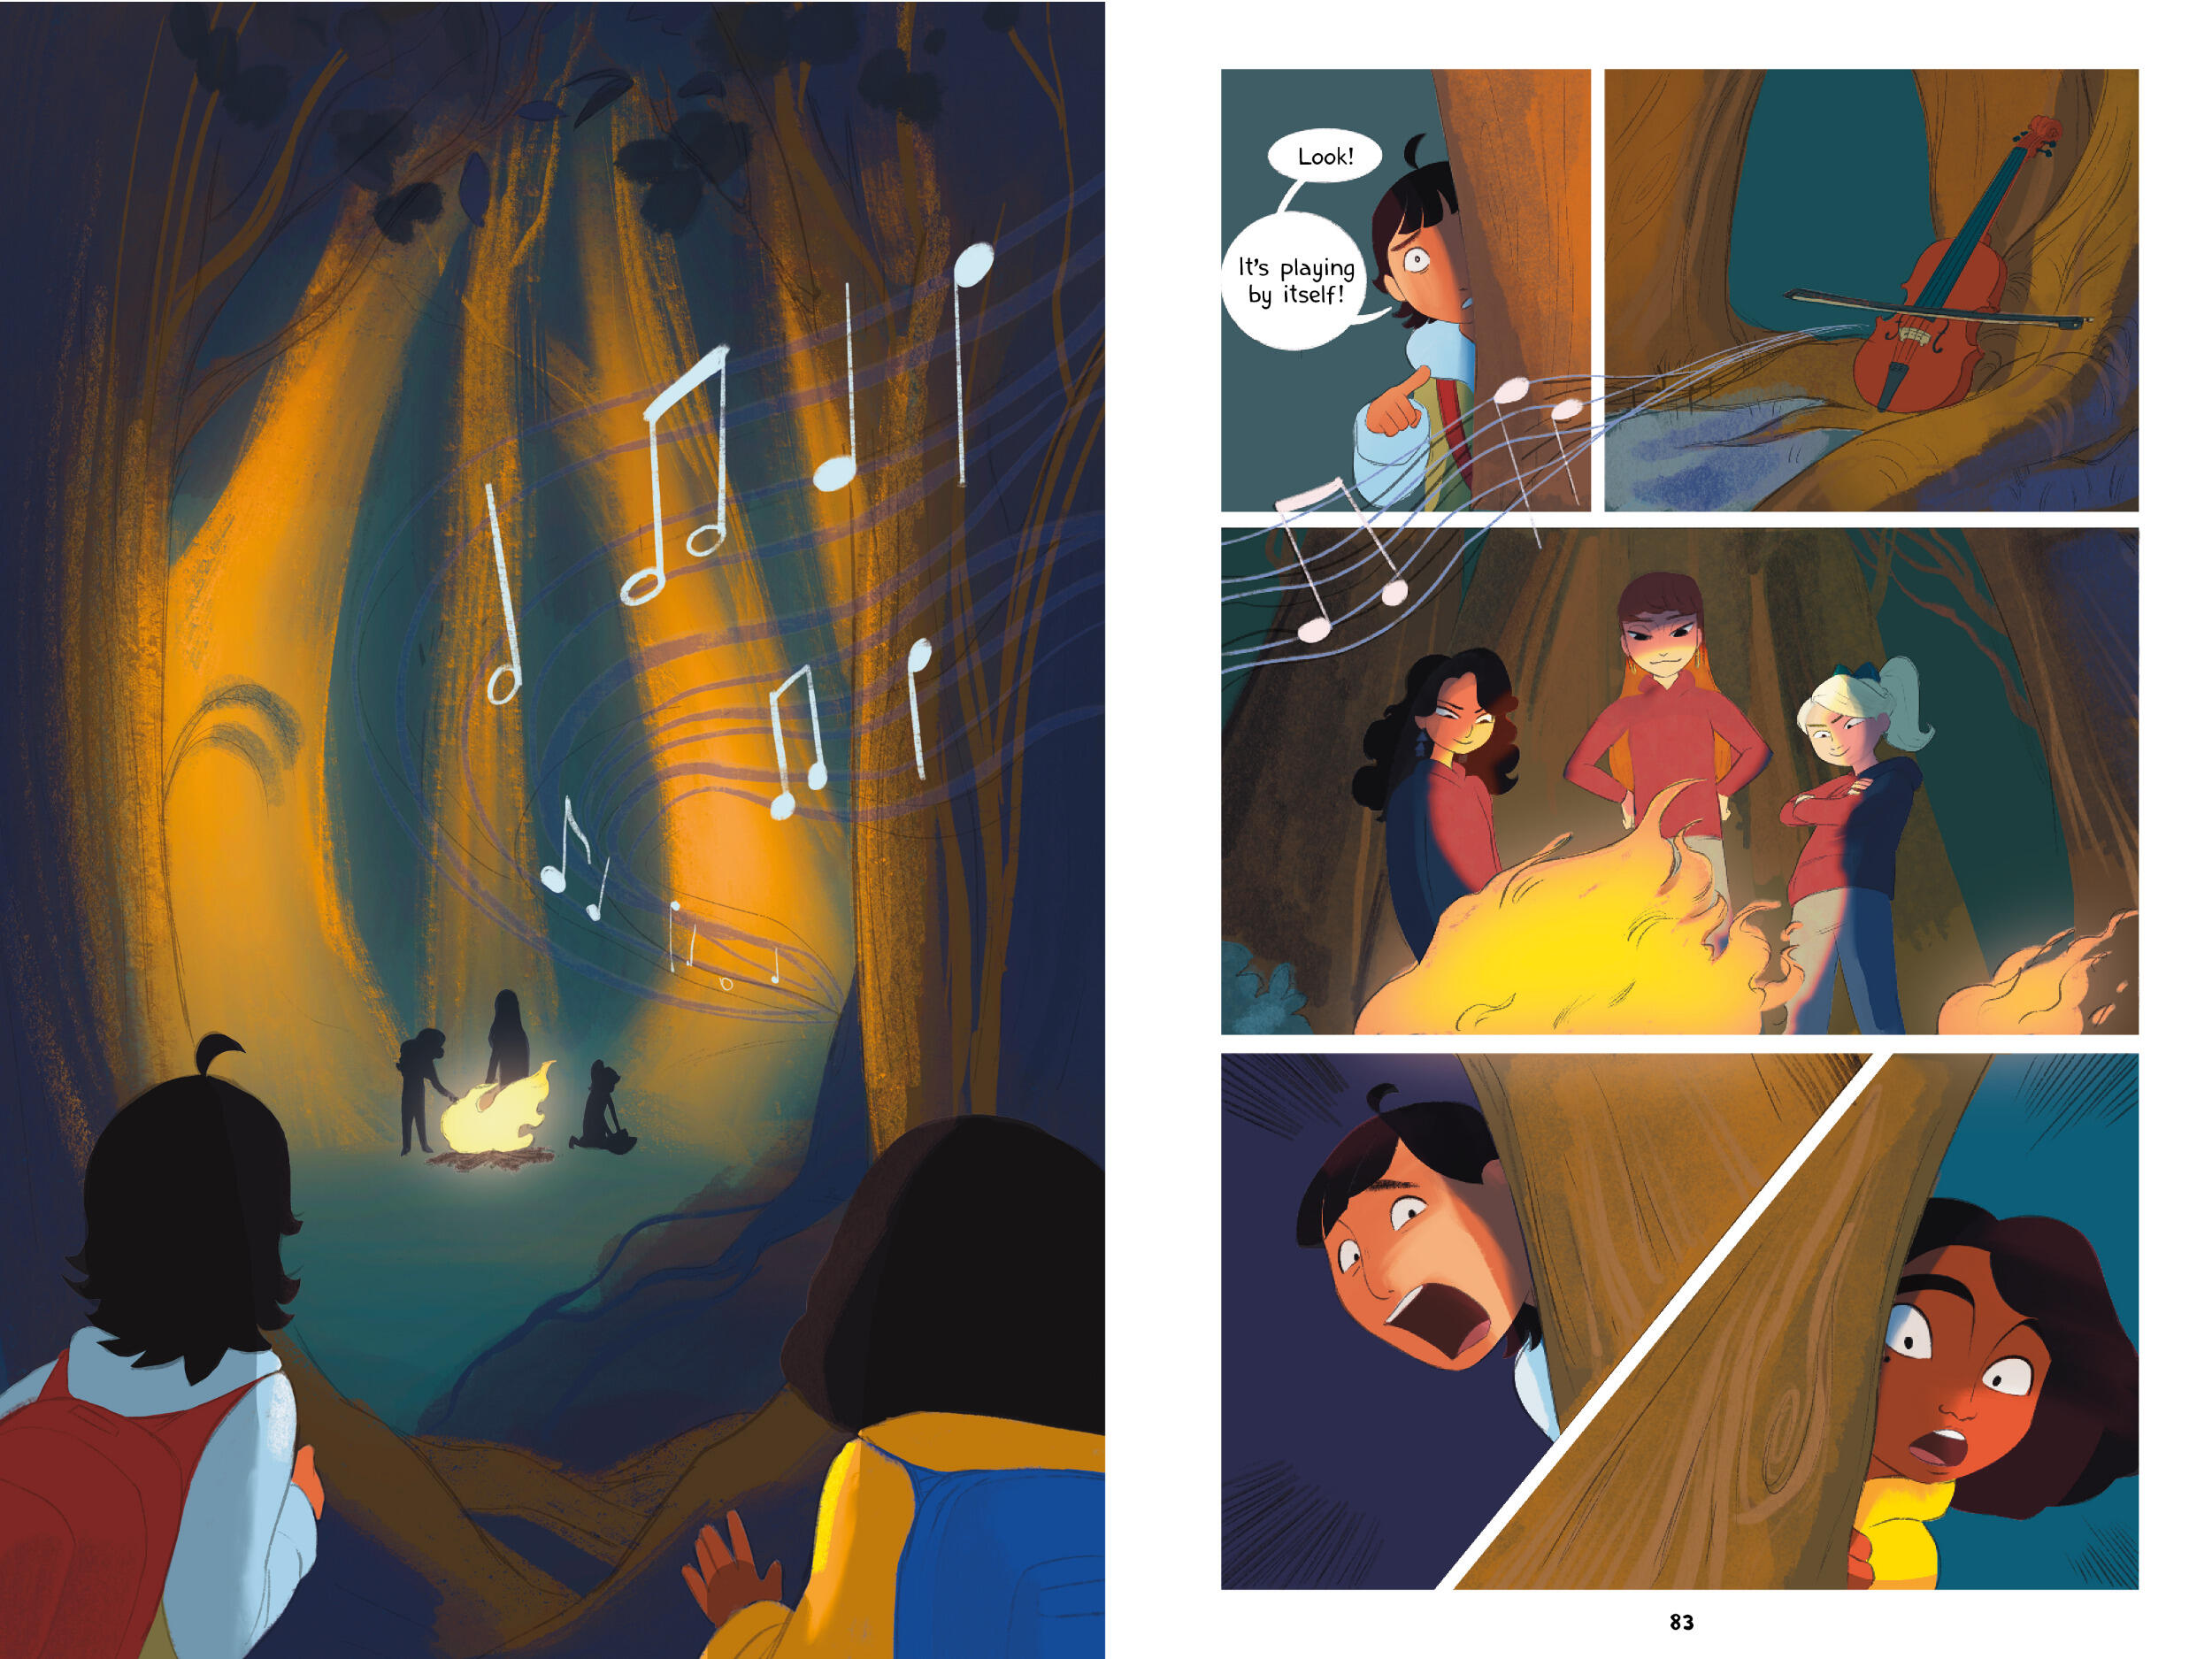 In several comic panels, music notes swirl over a scene of two students, Xi and Shakti, watching three girls with sinister expressions standing in front of a fire in the woods. A violin plays music by itself as the two students hide behind a tree. The text reads: “Look! It’s playing by itself!” Xi and Shakti gasp while peering out from behind a tree toward the fire.